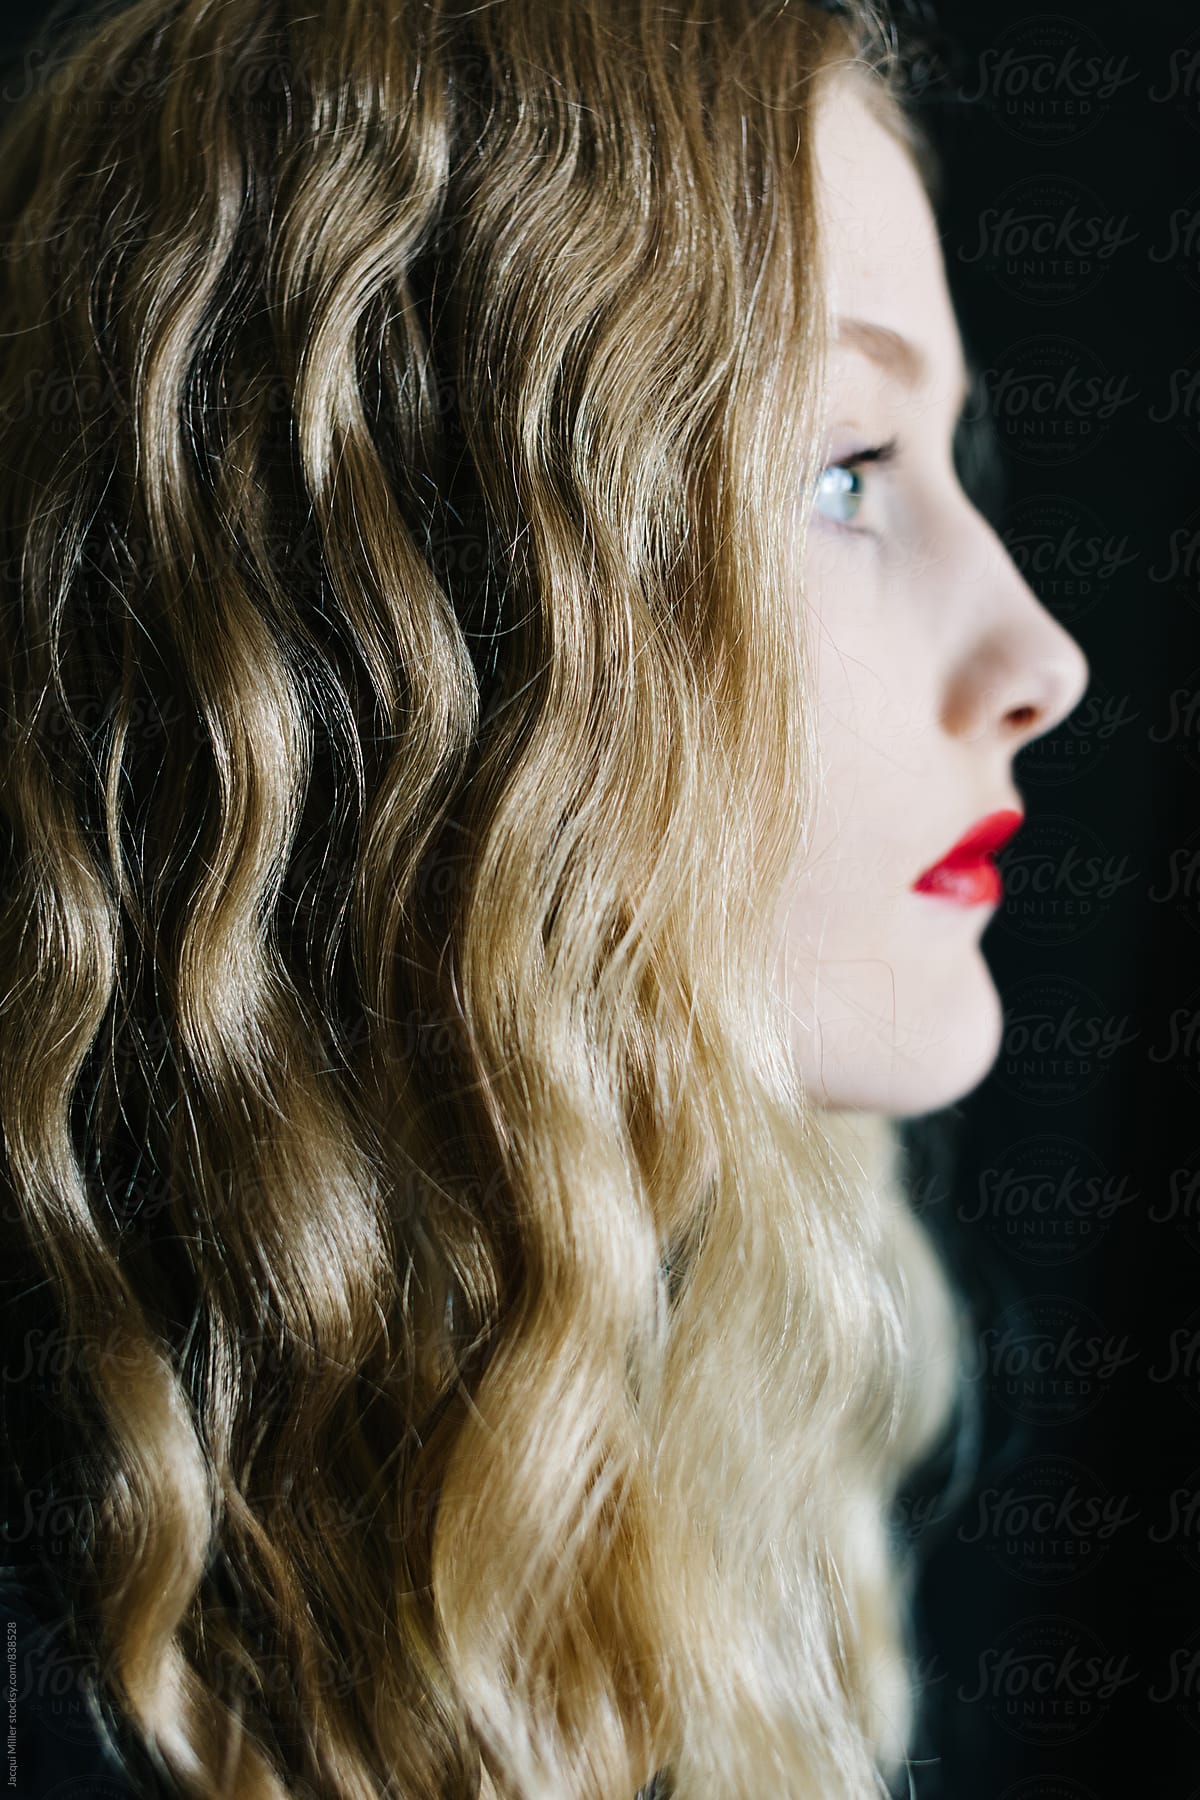 Side profile of Teen Girl with Long Blonde Hair and Red Lipstick - focus on hair